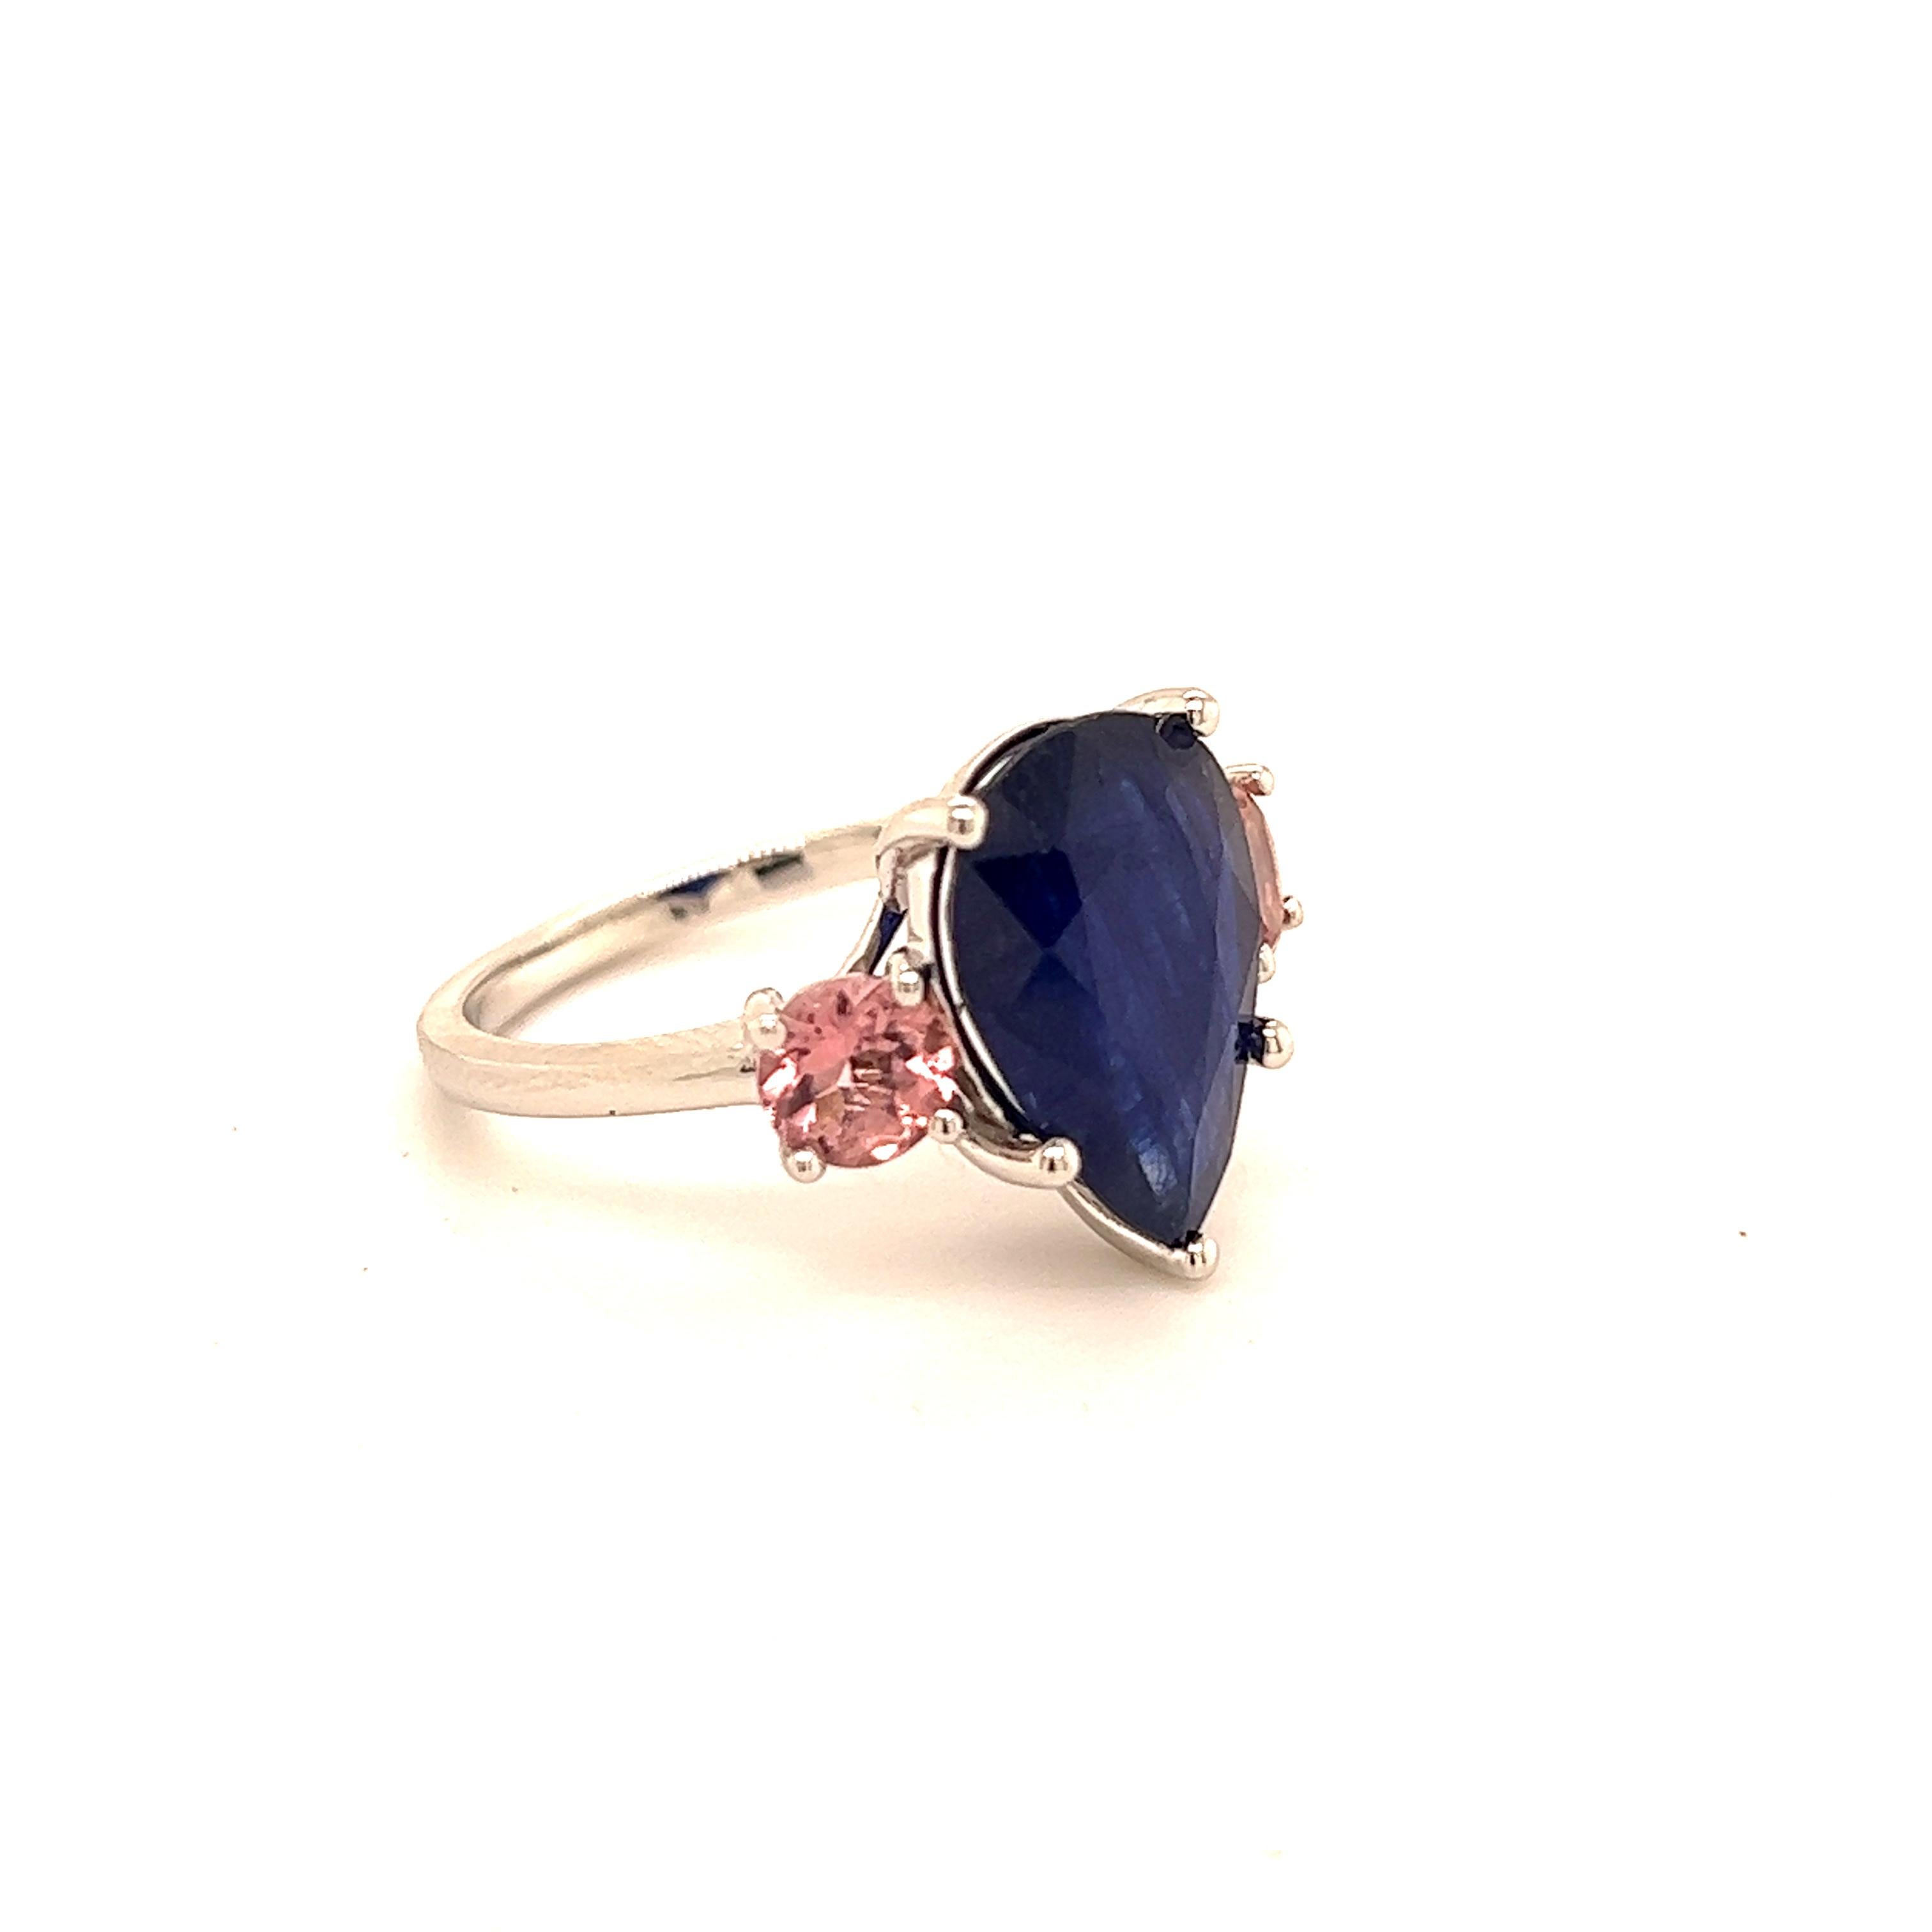 Natural Sapphire Diamond Ring 7 14k W Gold 6.16 TCW Certified For Sale 2